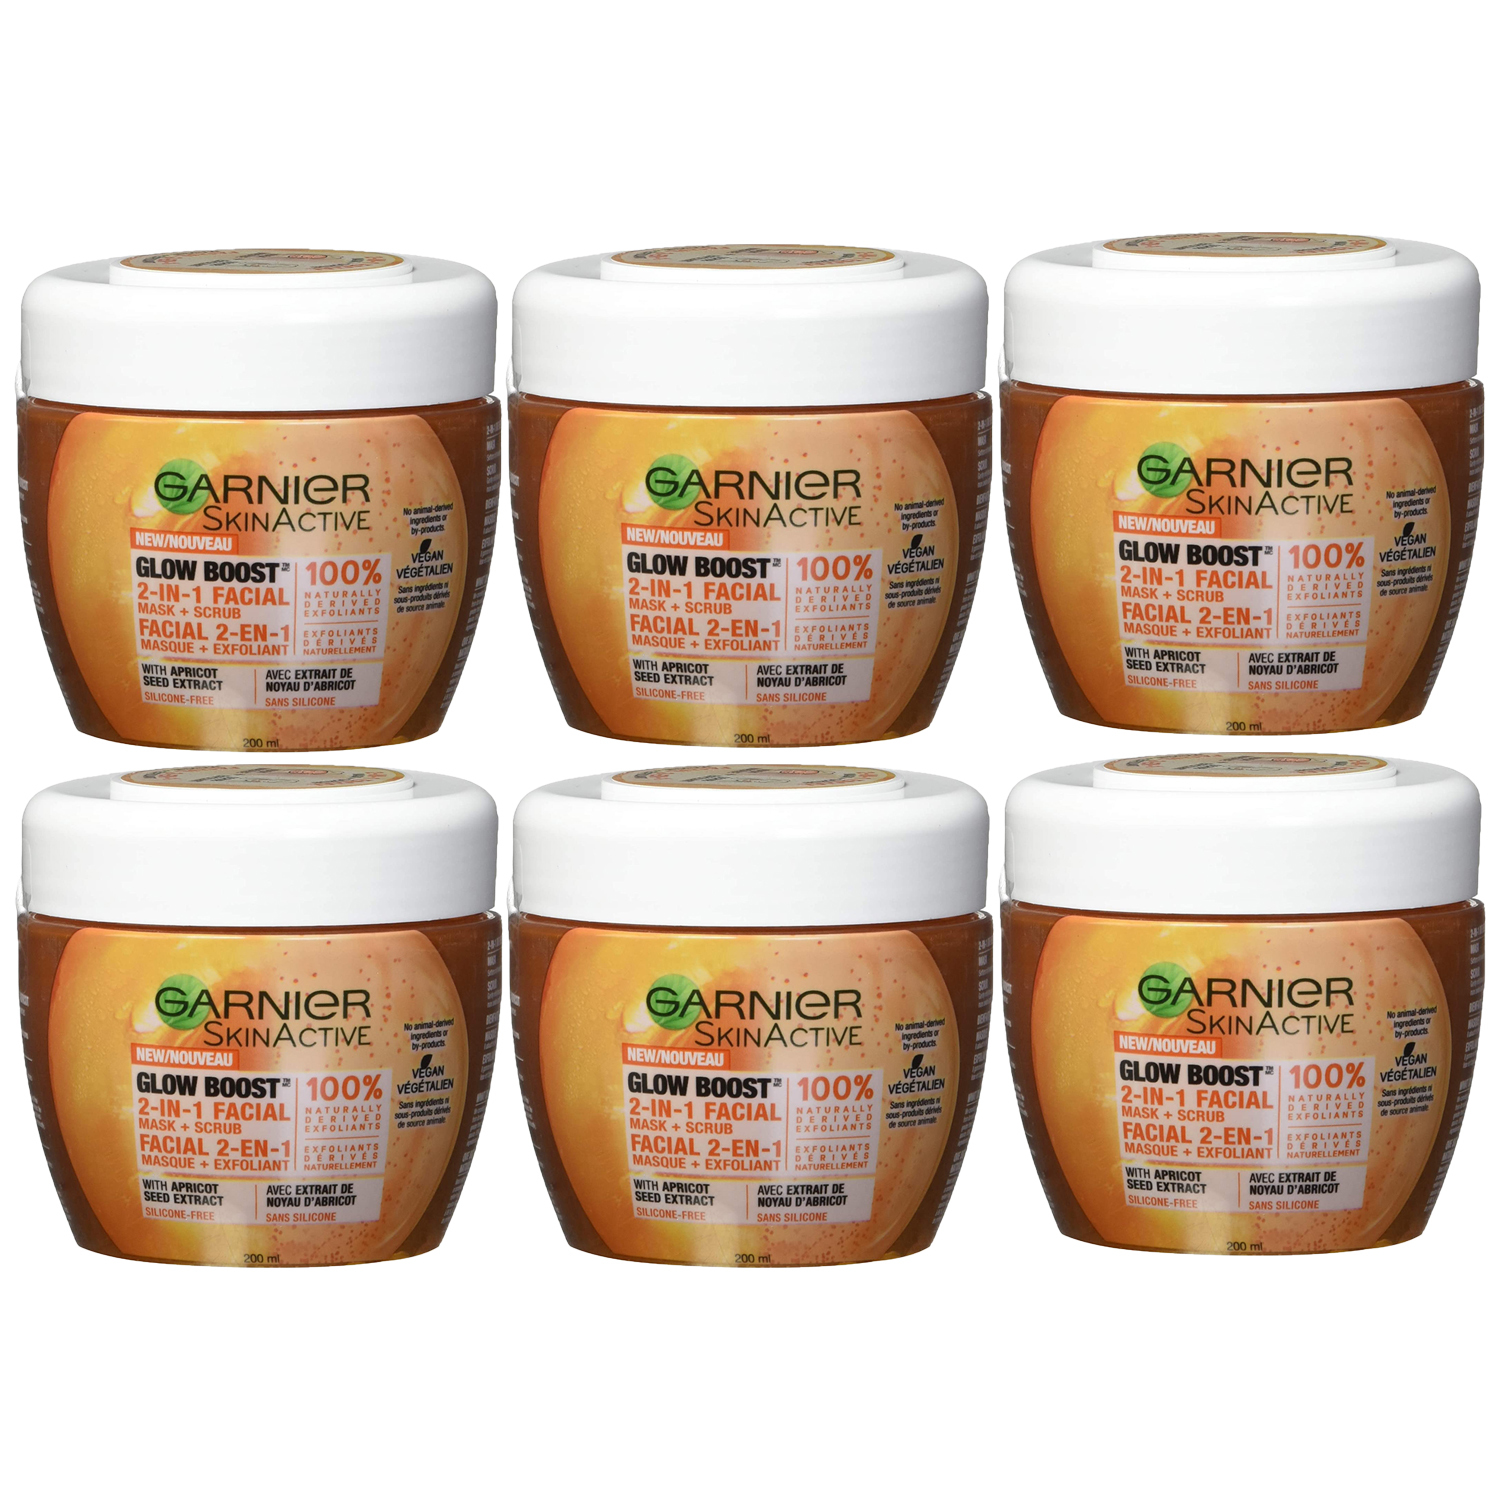 6-Pack New Garnier SkinActive Glow Boost 2-in-1 Facial Mask and Scrub, 6.76 oz - $48.34